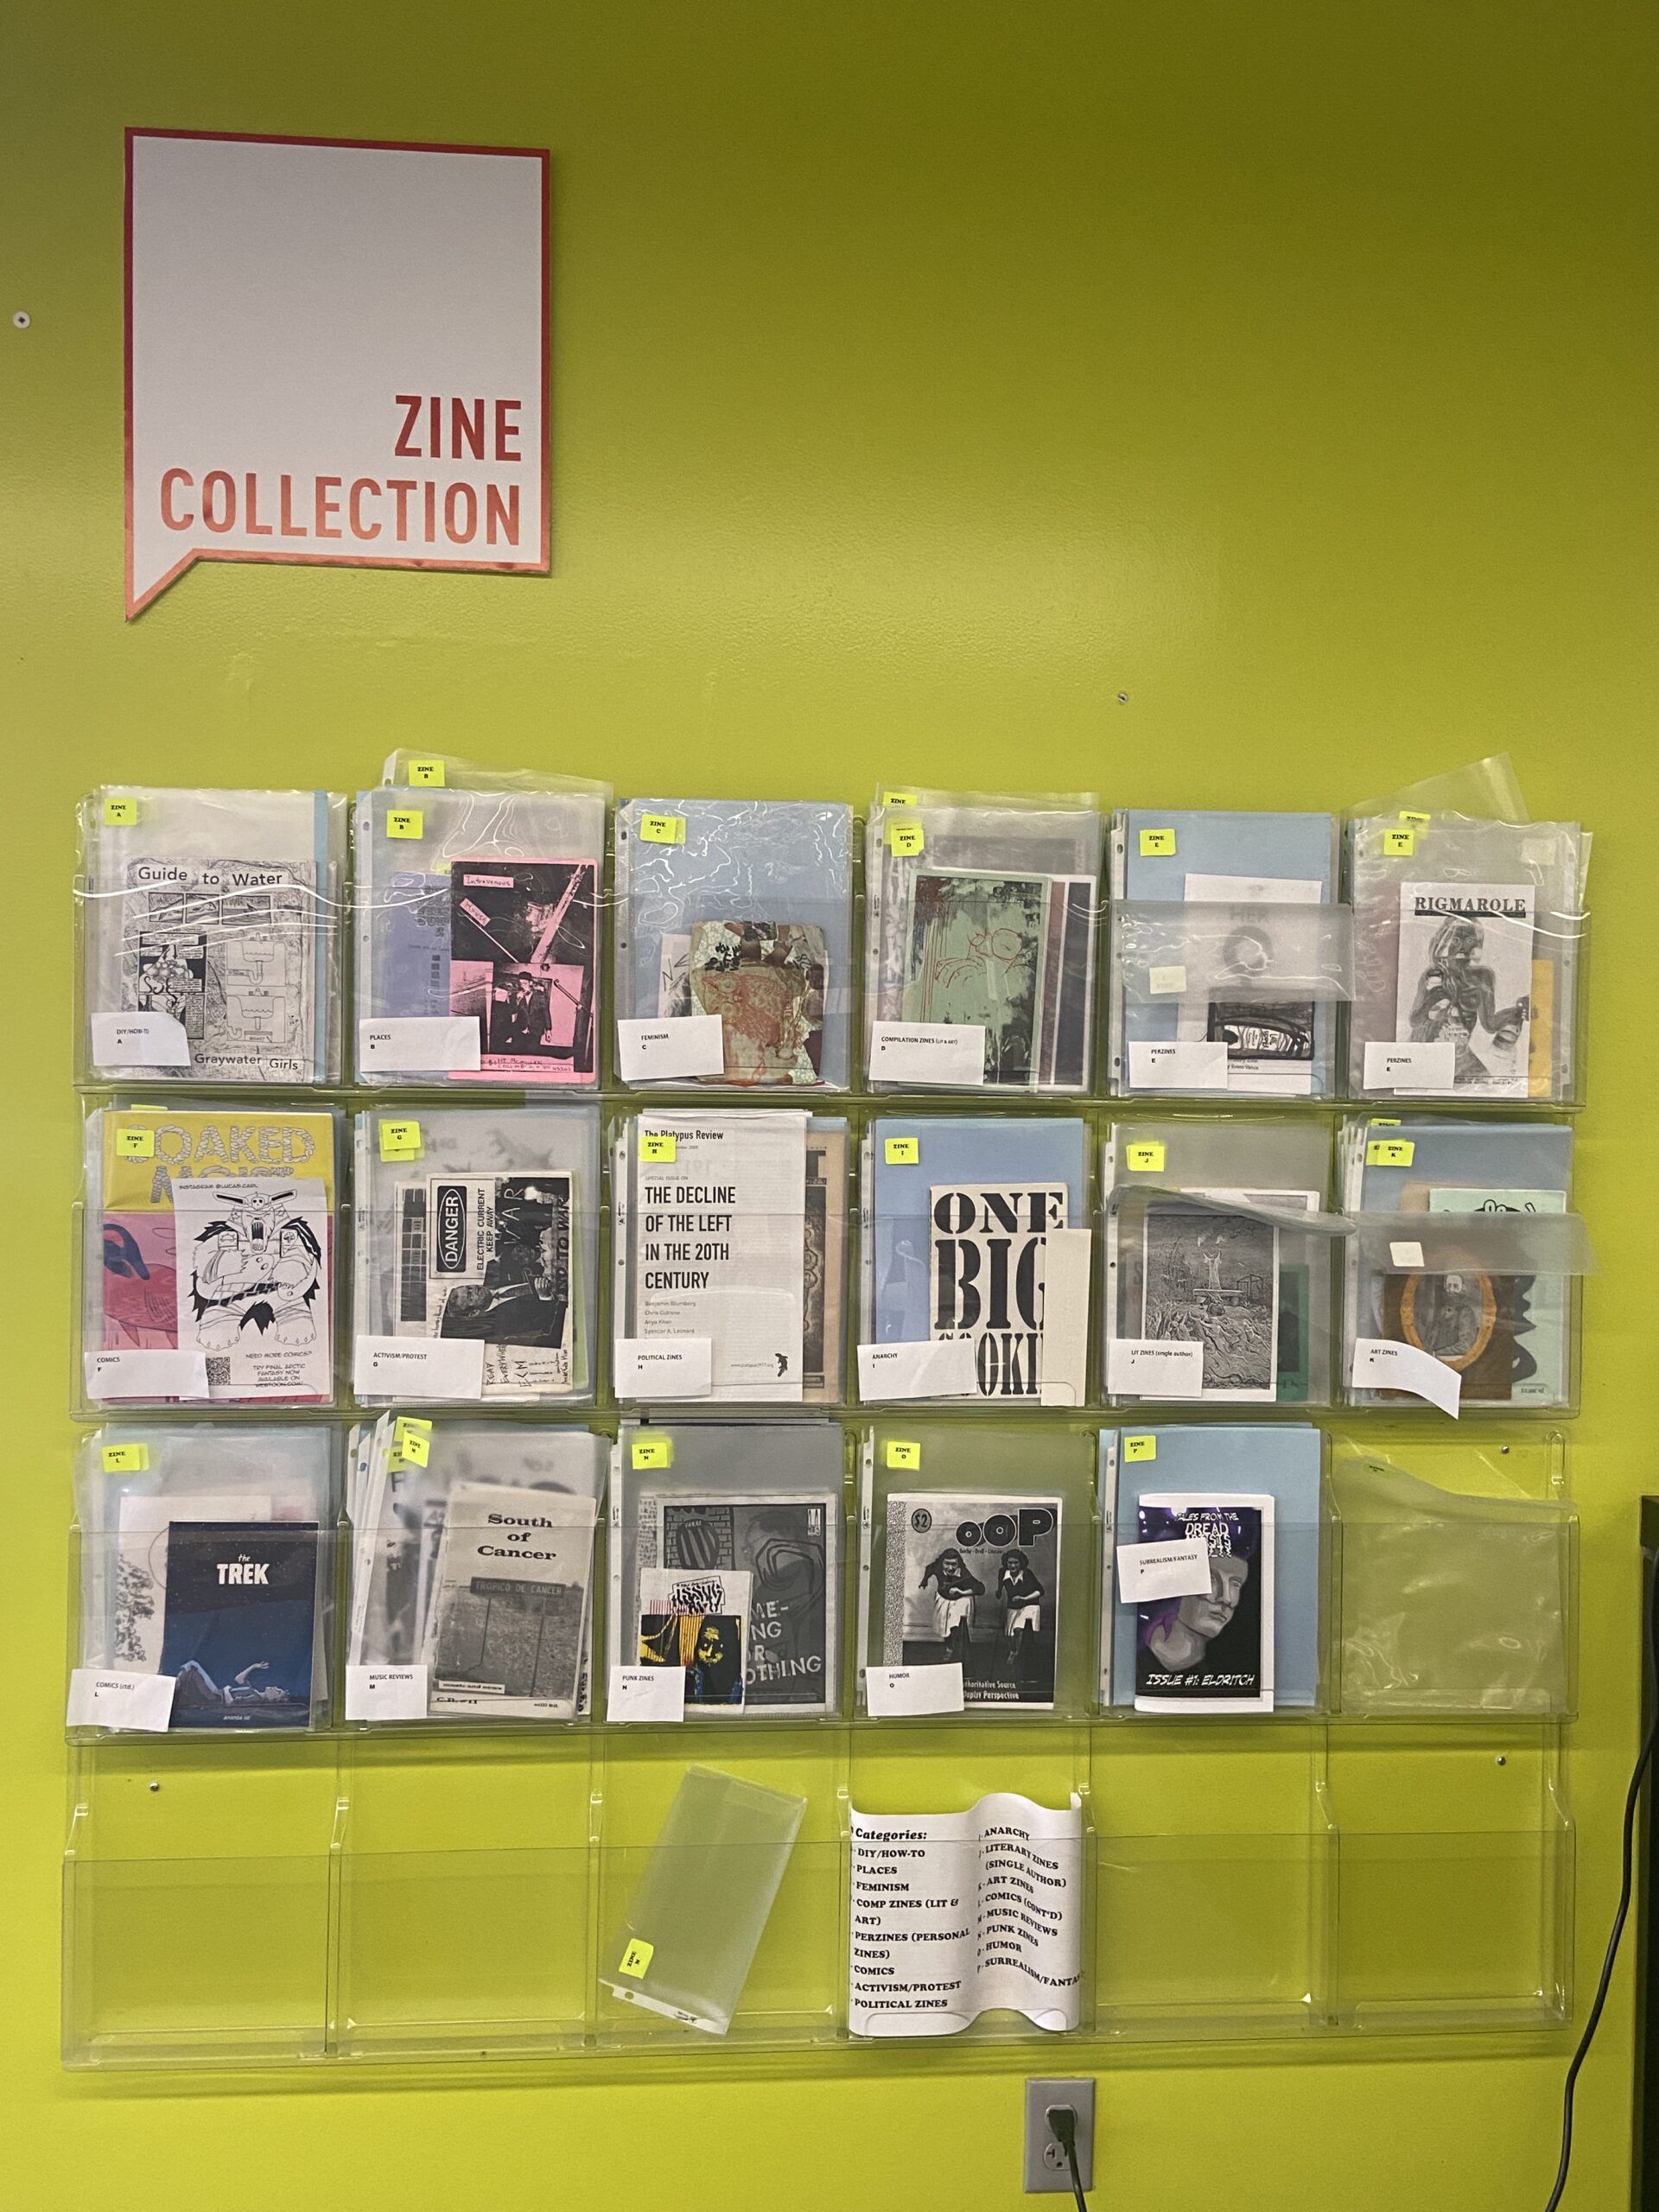 On a bright chartreuse-colored wall, there are over two dozen plastic magazine holders mounted and filled with zines. There is a zine above it that reads "Zine Collection." Several of the magazine holders at the bottom are empty.